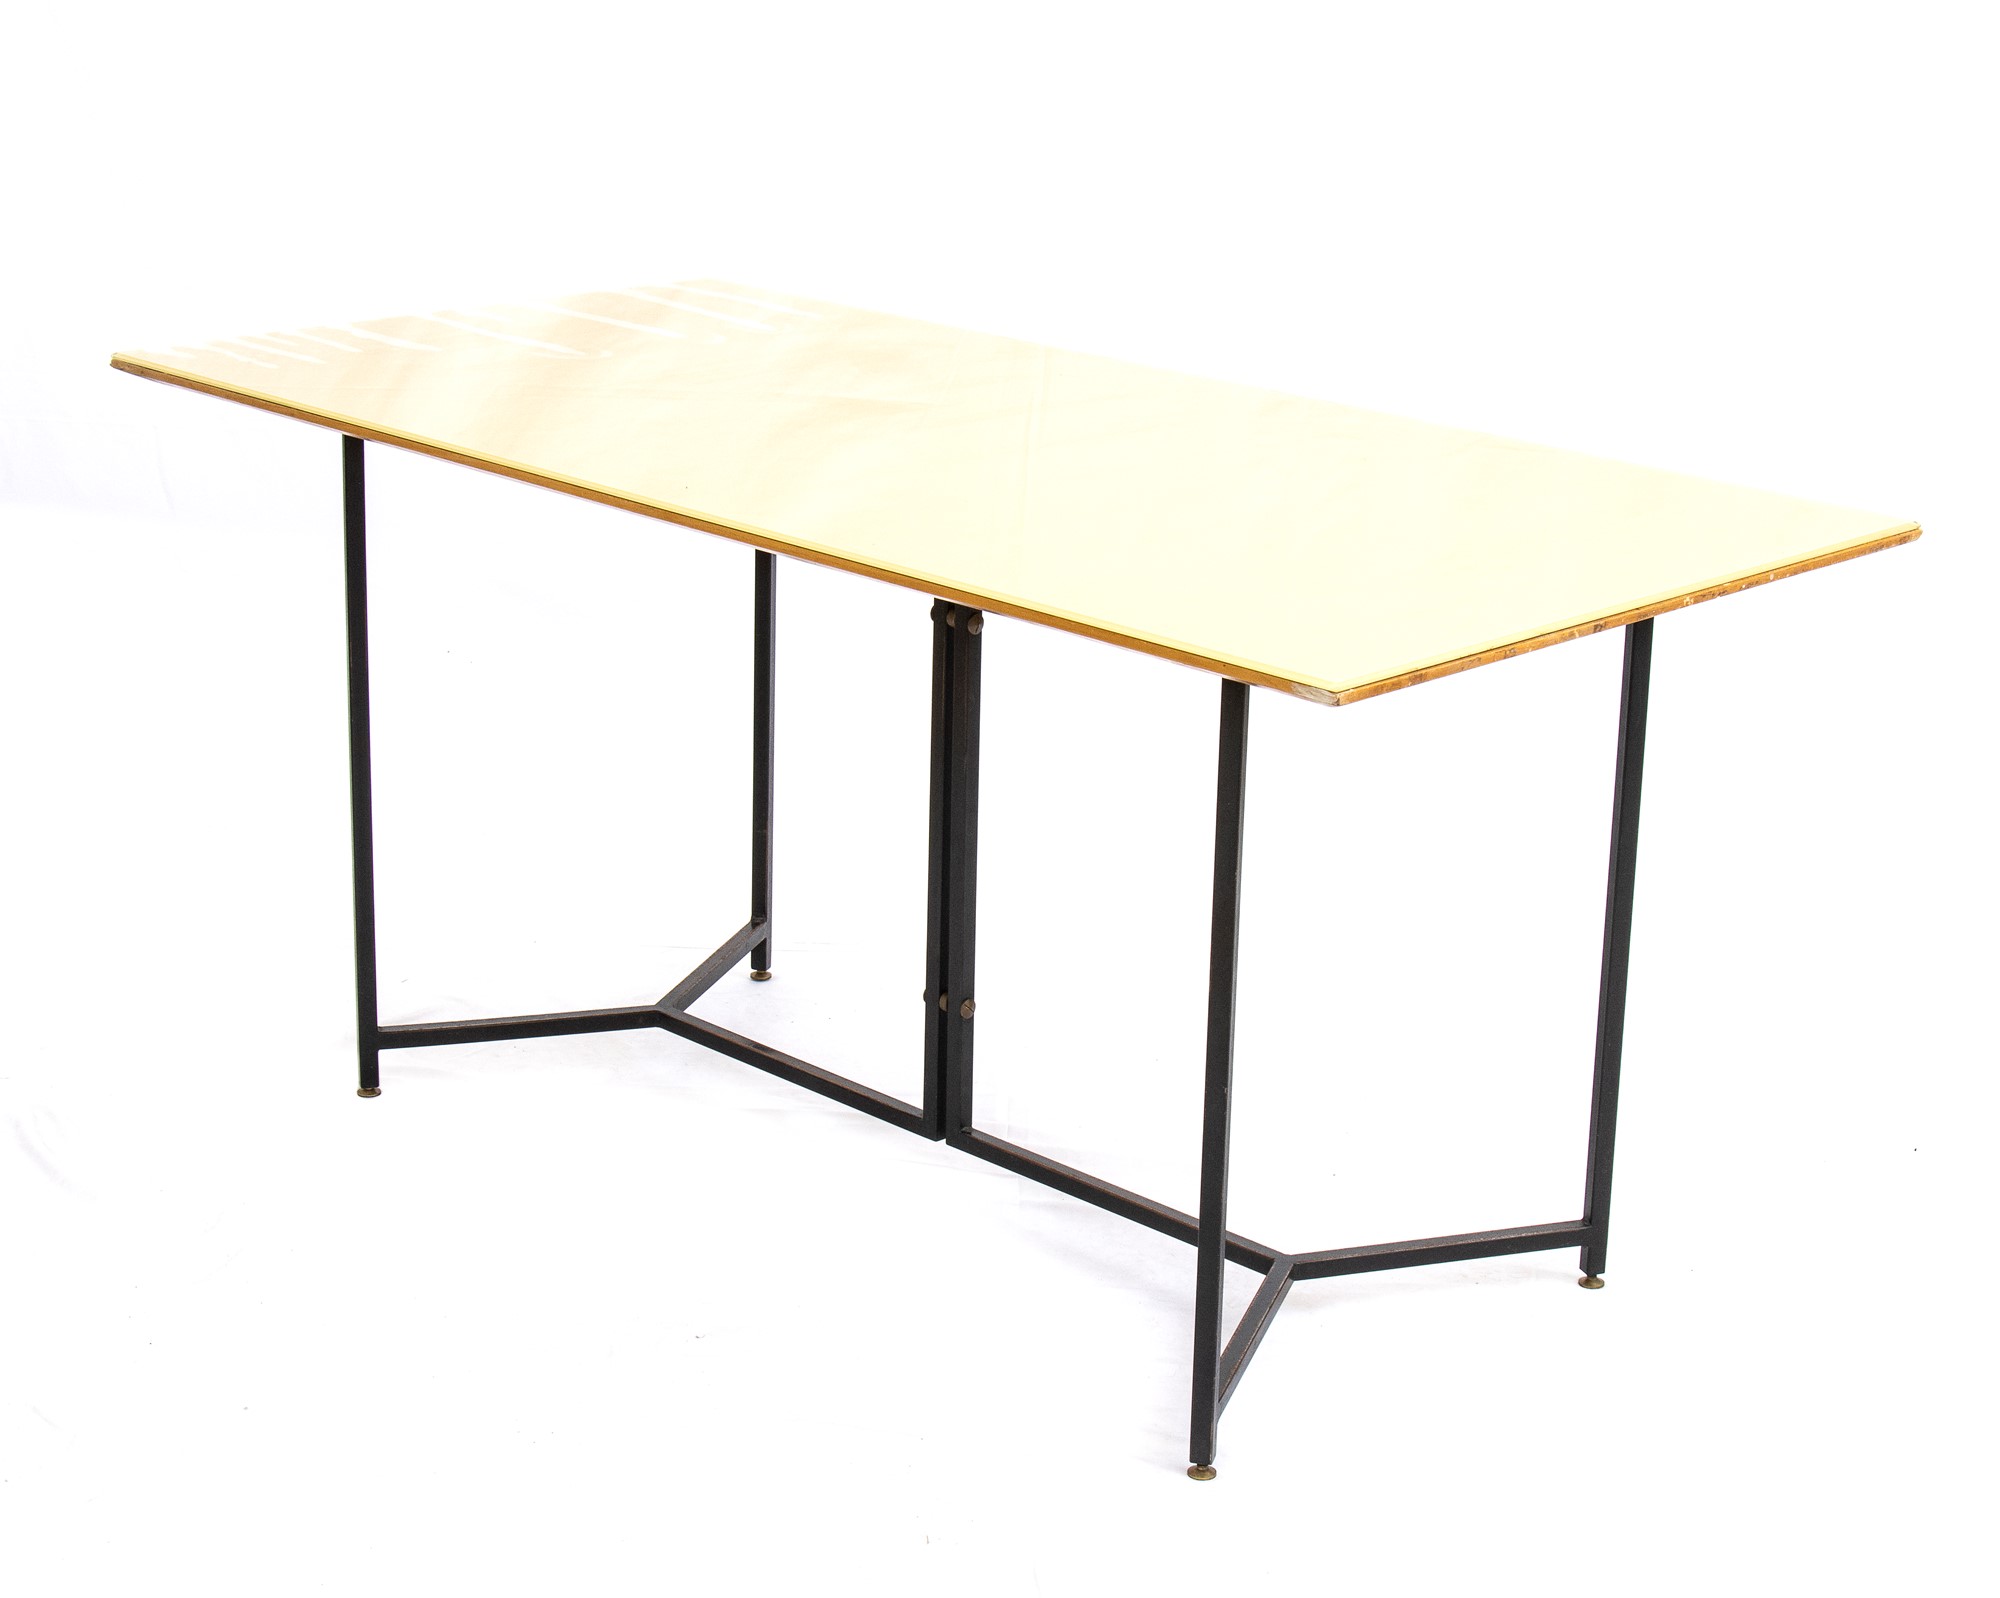 Rectangular table with metal structure and wooden and glass top - Image 10 of 10